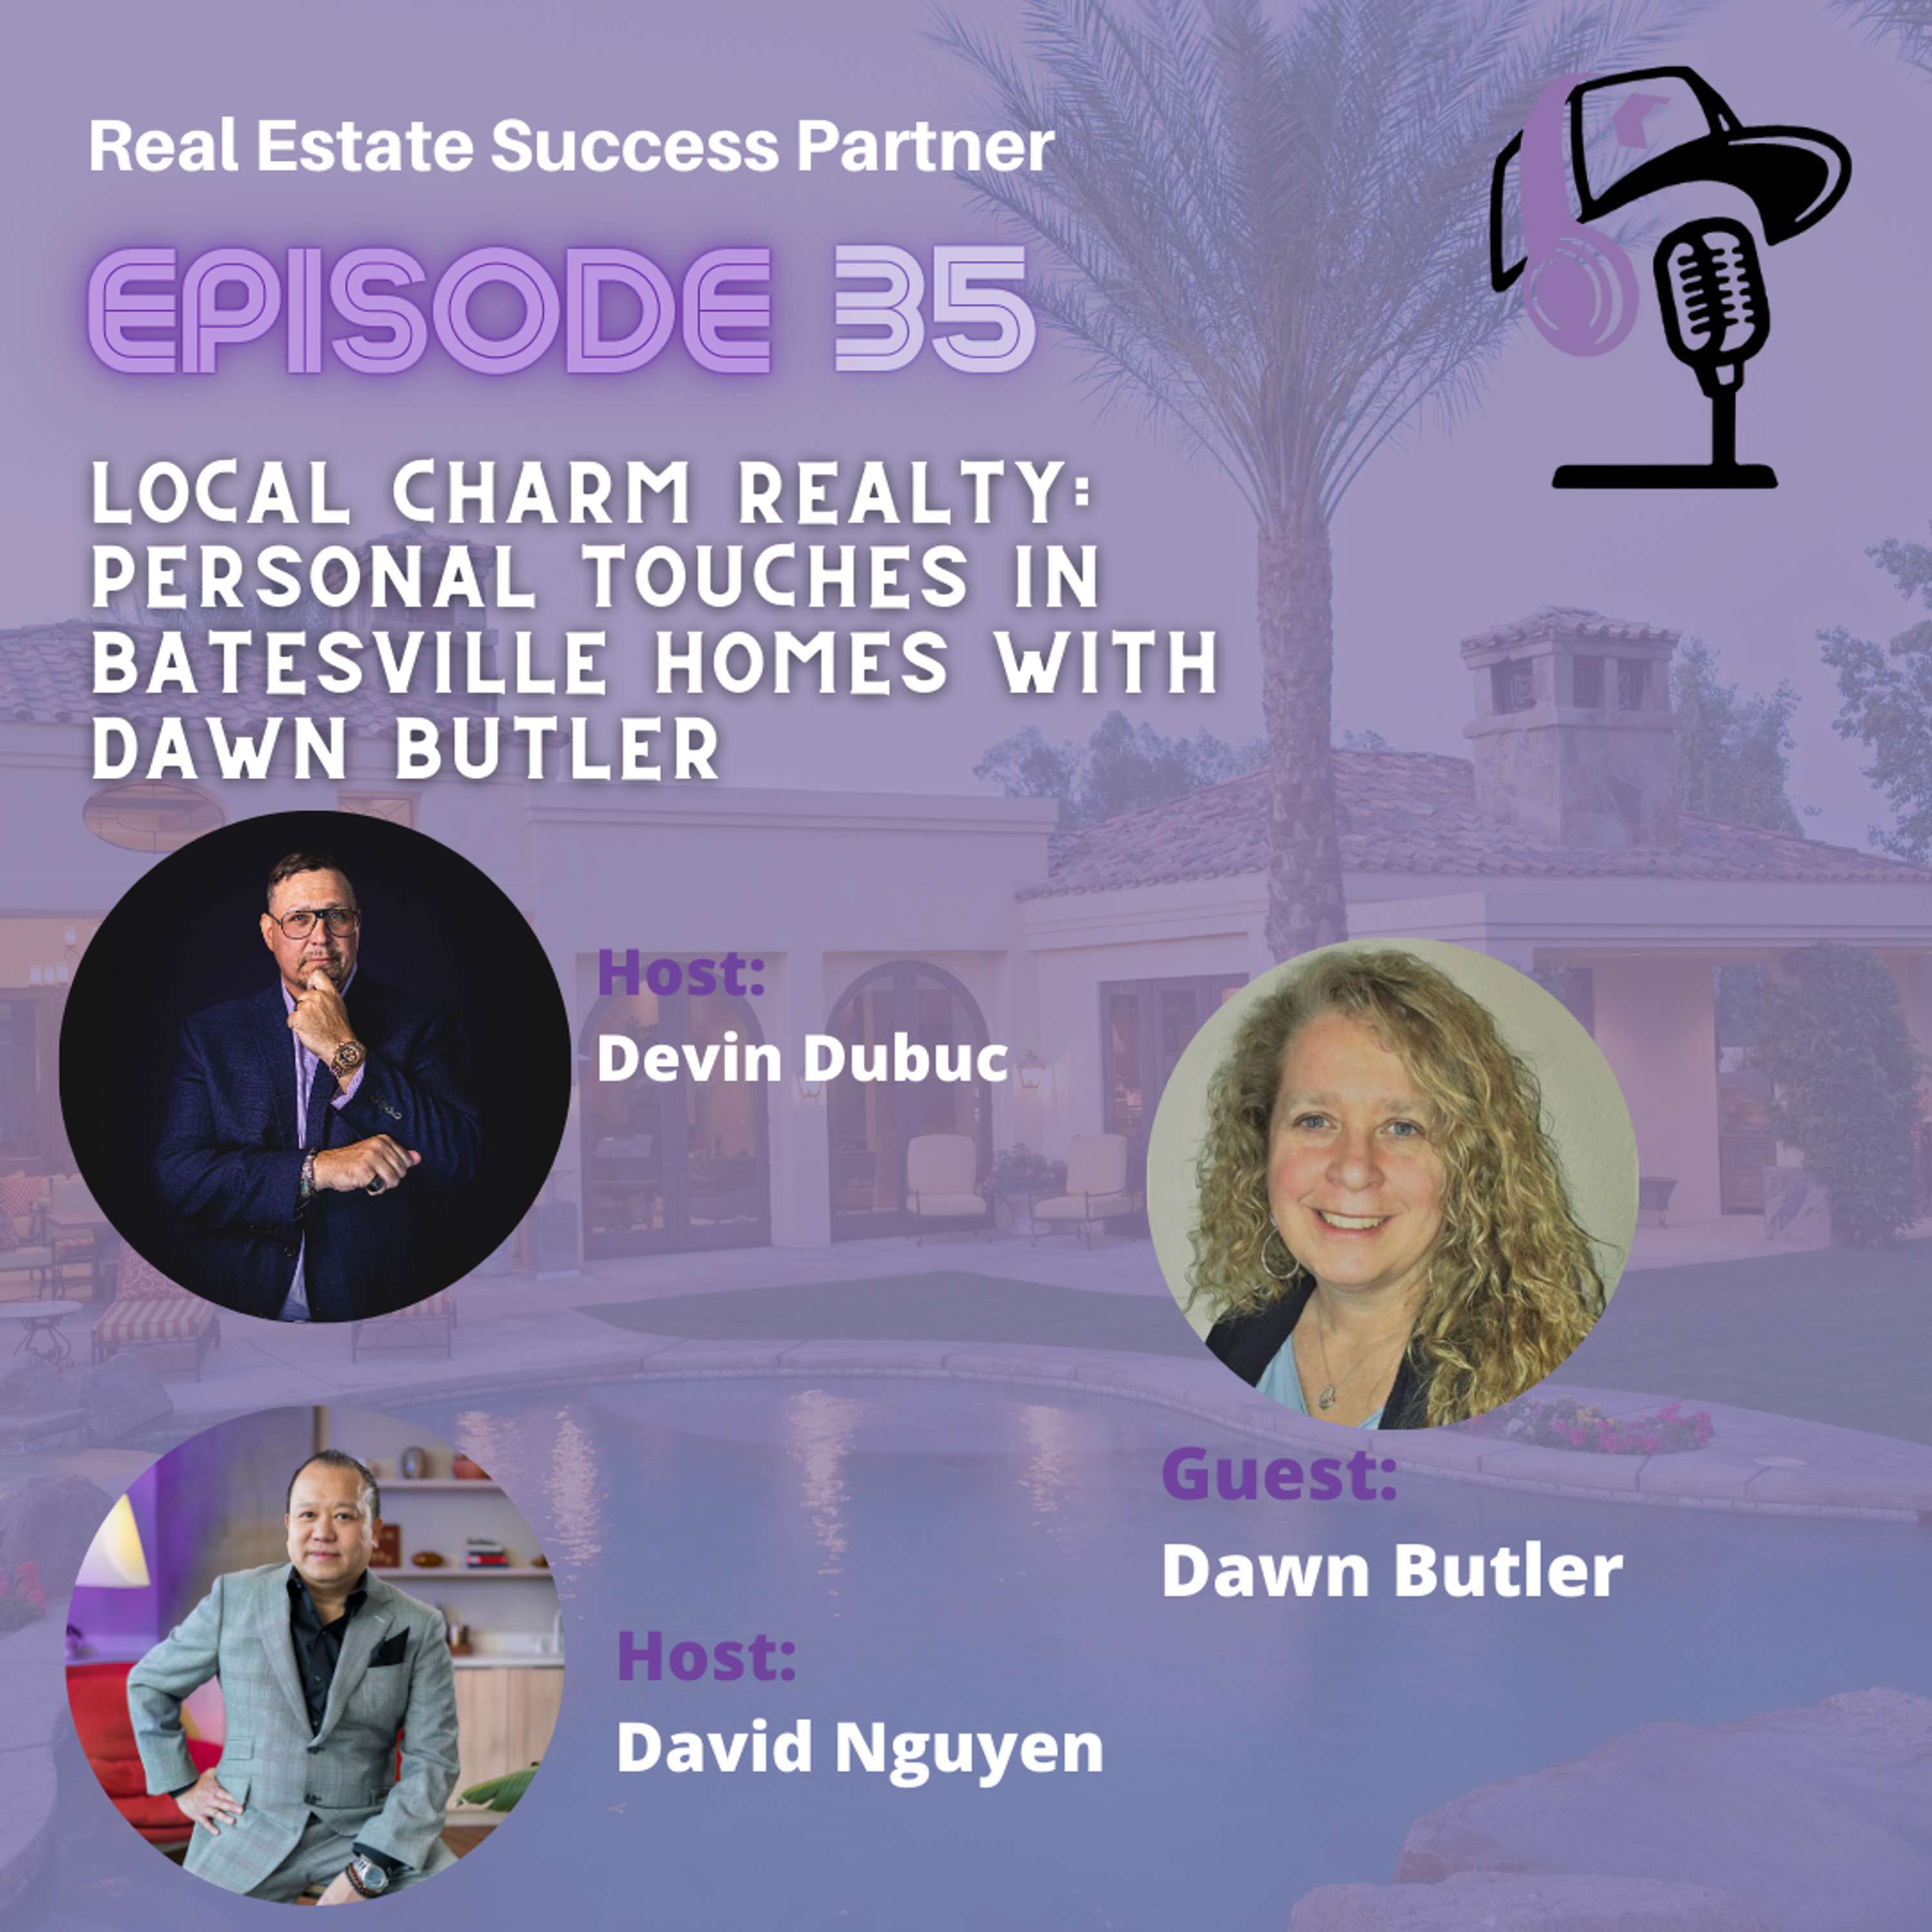 Episode 35: Local Charm Realty: Personal Touches in Batesville Homes with Dawn Butler